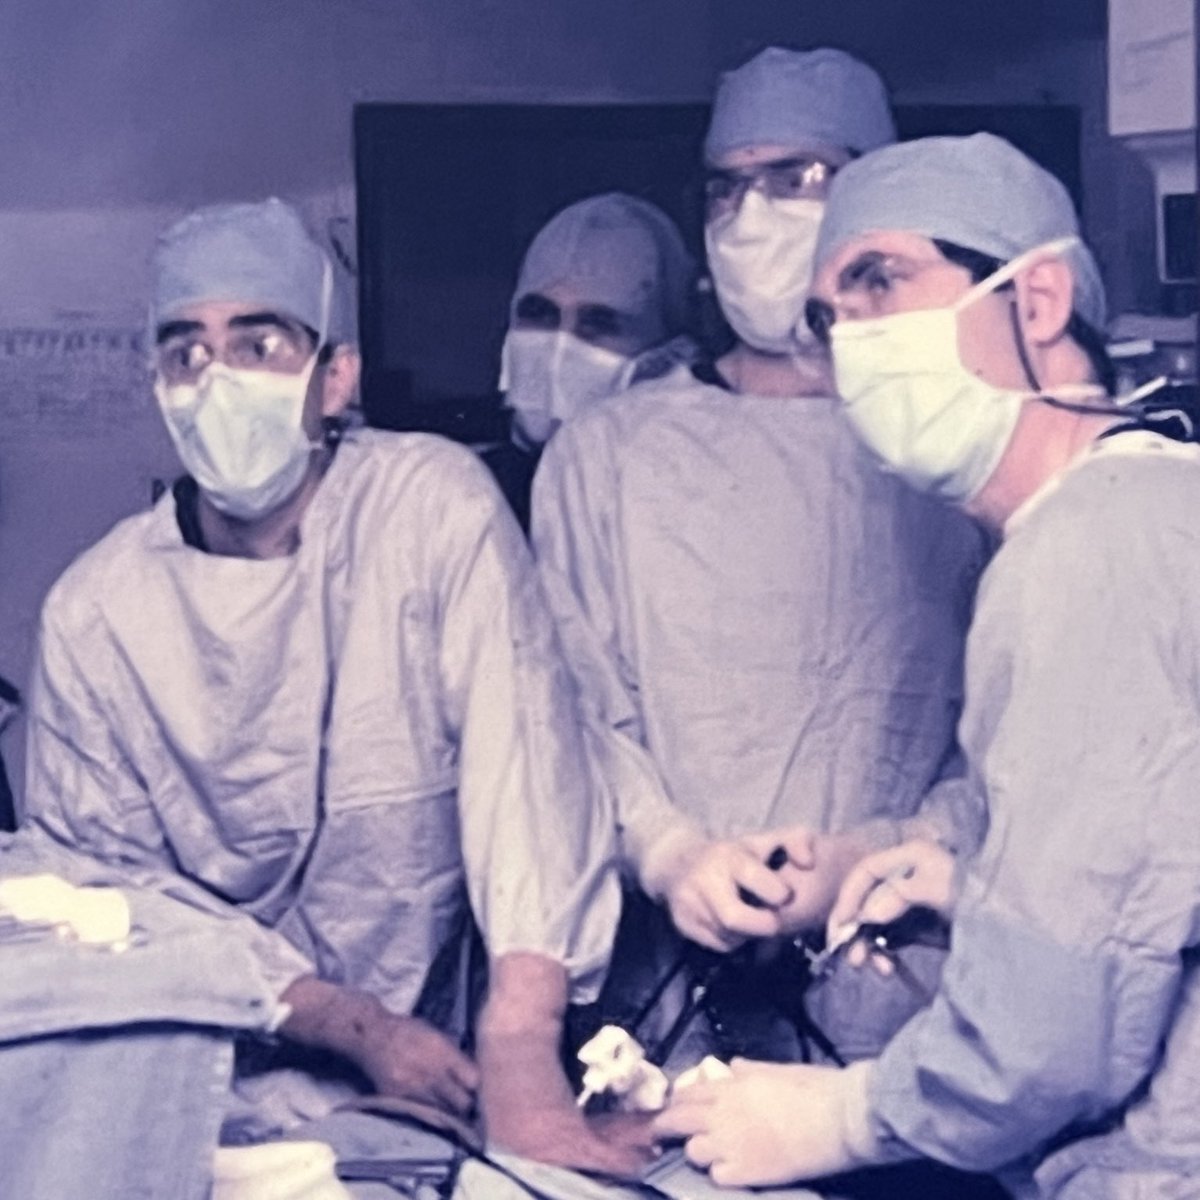 This picture documented a historical moment in urology. The first laparoscopic nephrostomy in patient was performed by Dr Ralph Clayton at @WashU_Uro in 1990. This pioneered the entire field of minimally invasive urologic surgery.